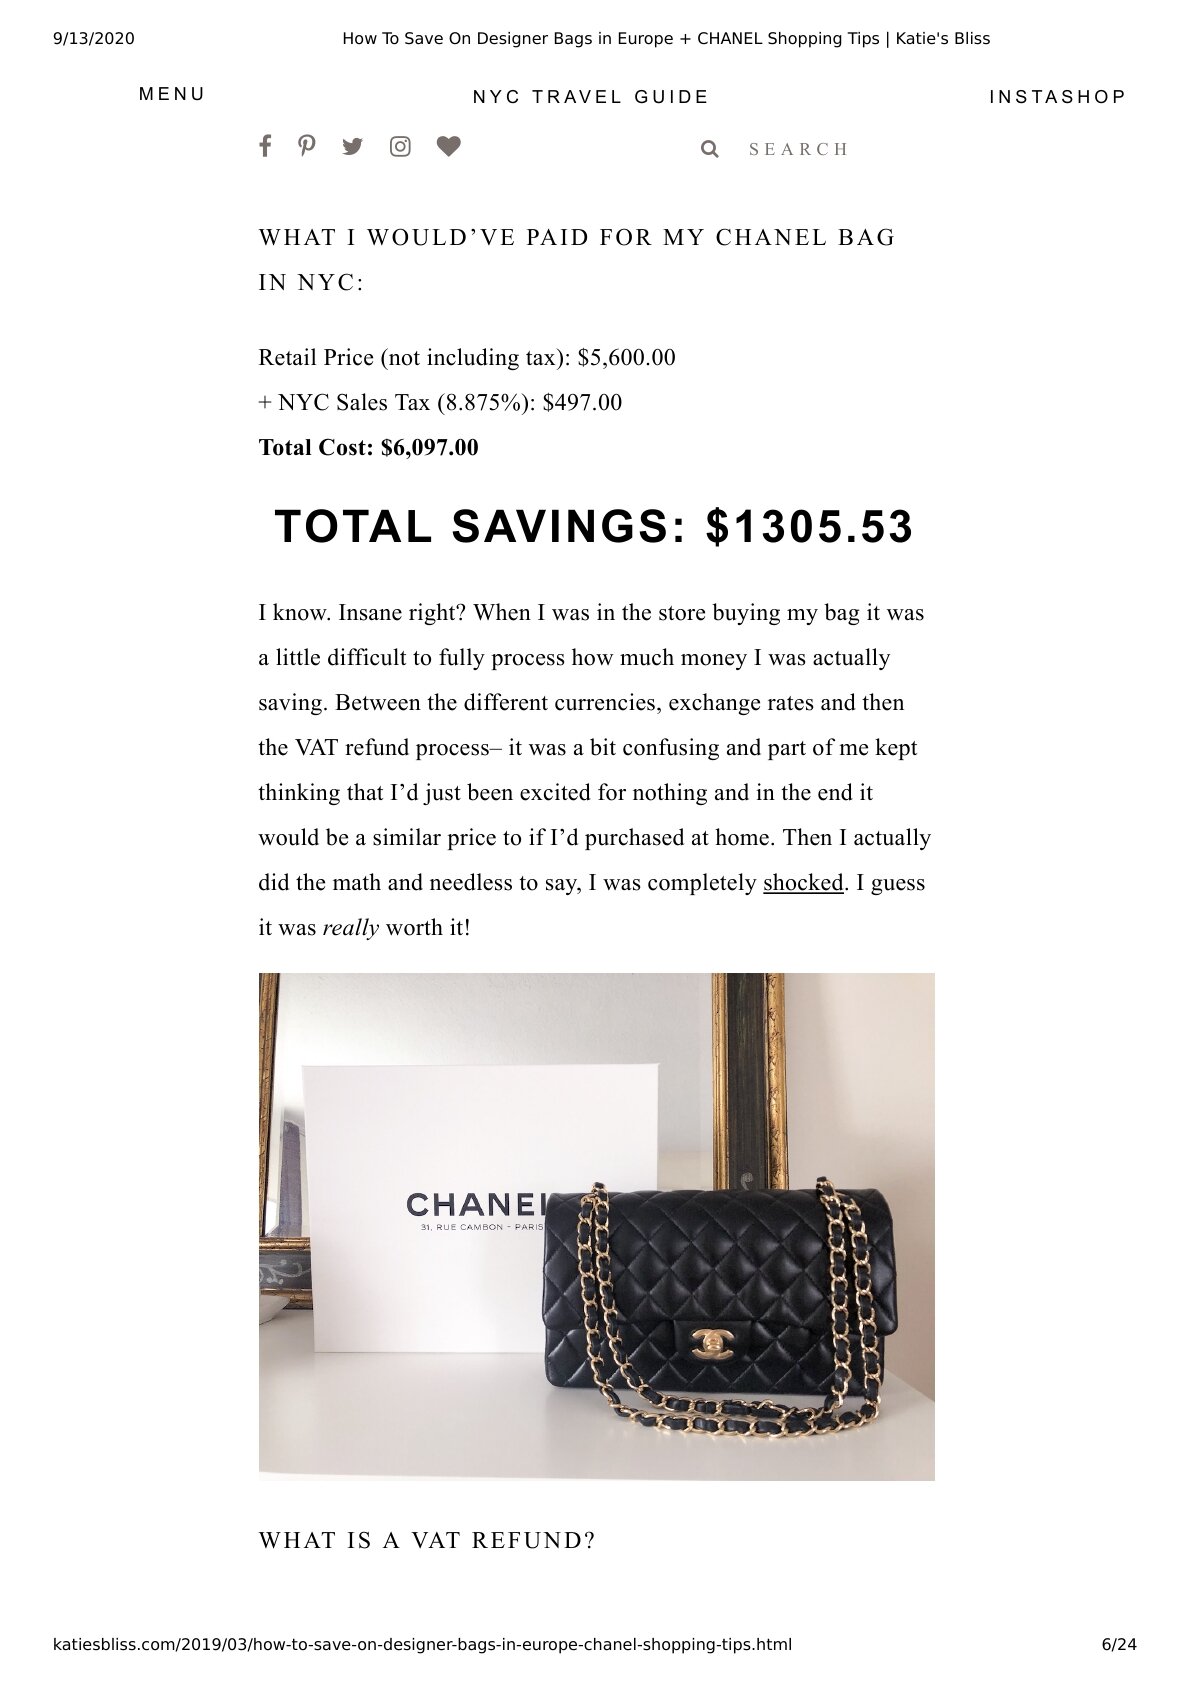 how to save on designer bags in europe + chanel shopping tips - My ...